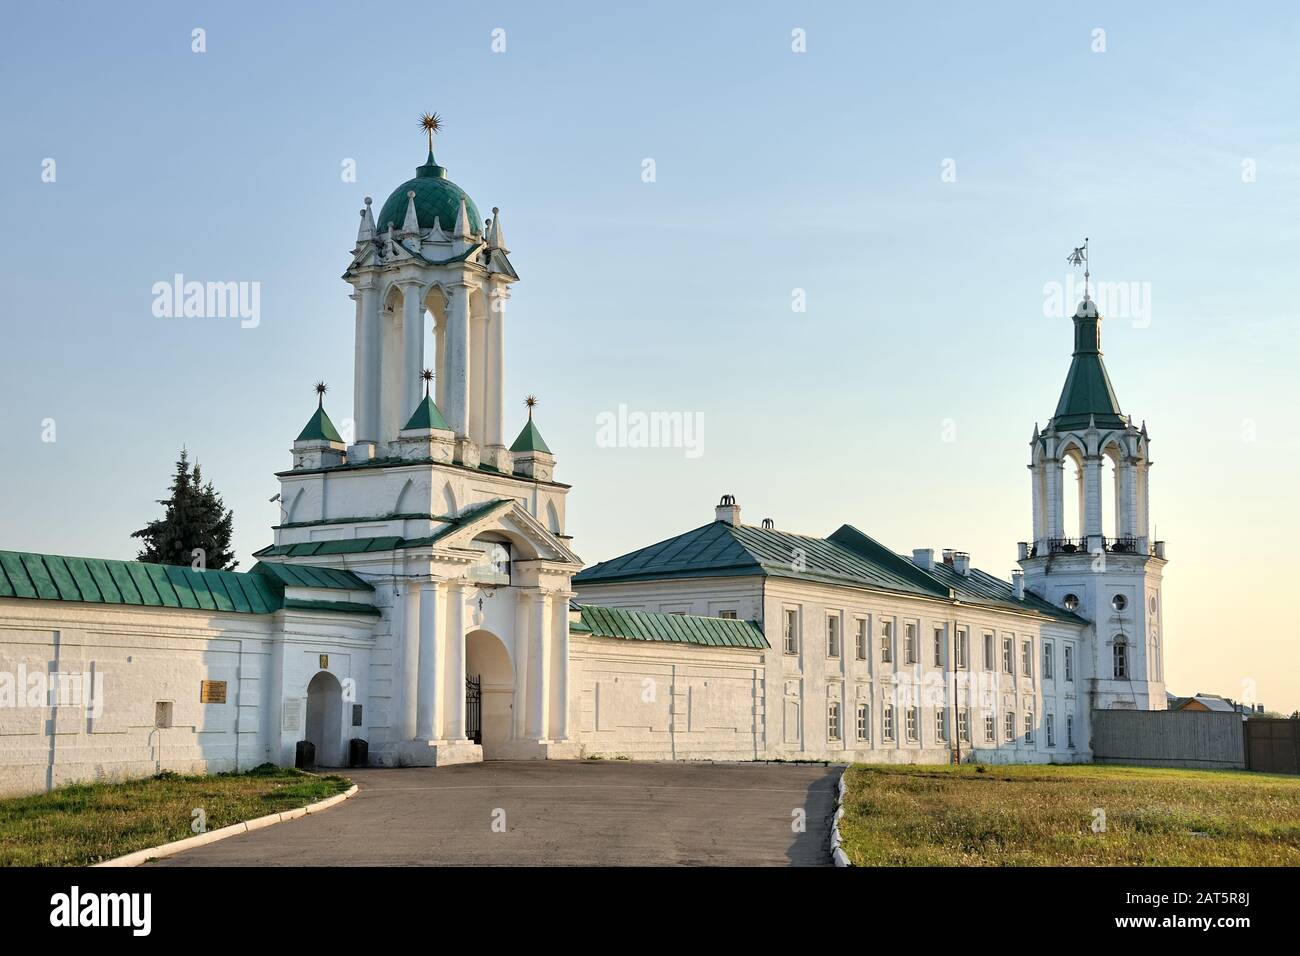 = North Monastery Wall with Entrance Gate at Sunset in Summer (angled view) =  An angle view of the northern part of the wall of the Spaso-Yakovlevsky Stock Photo